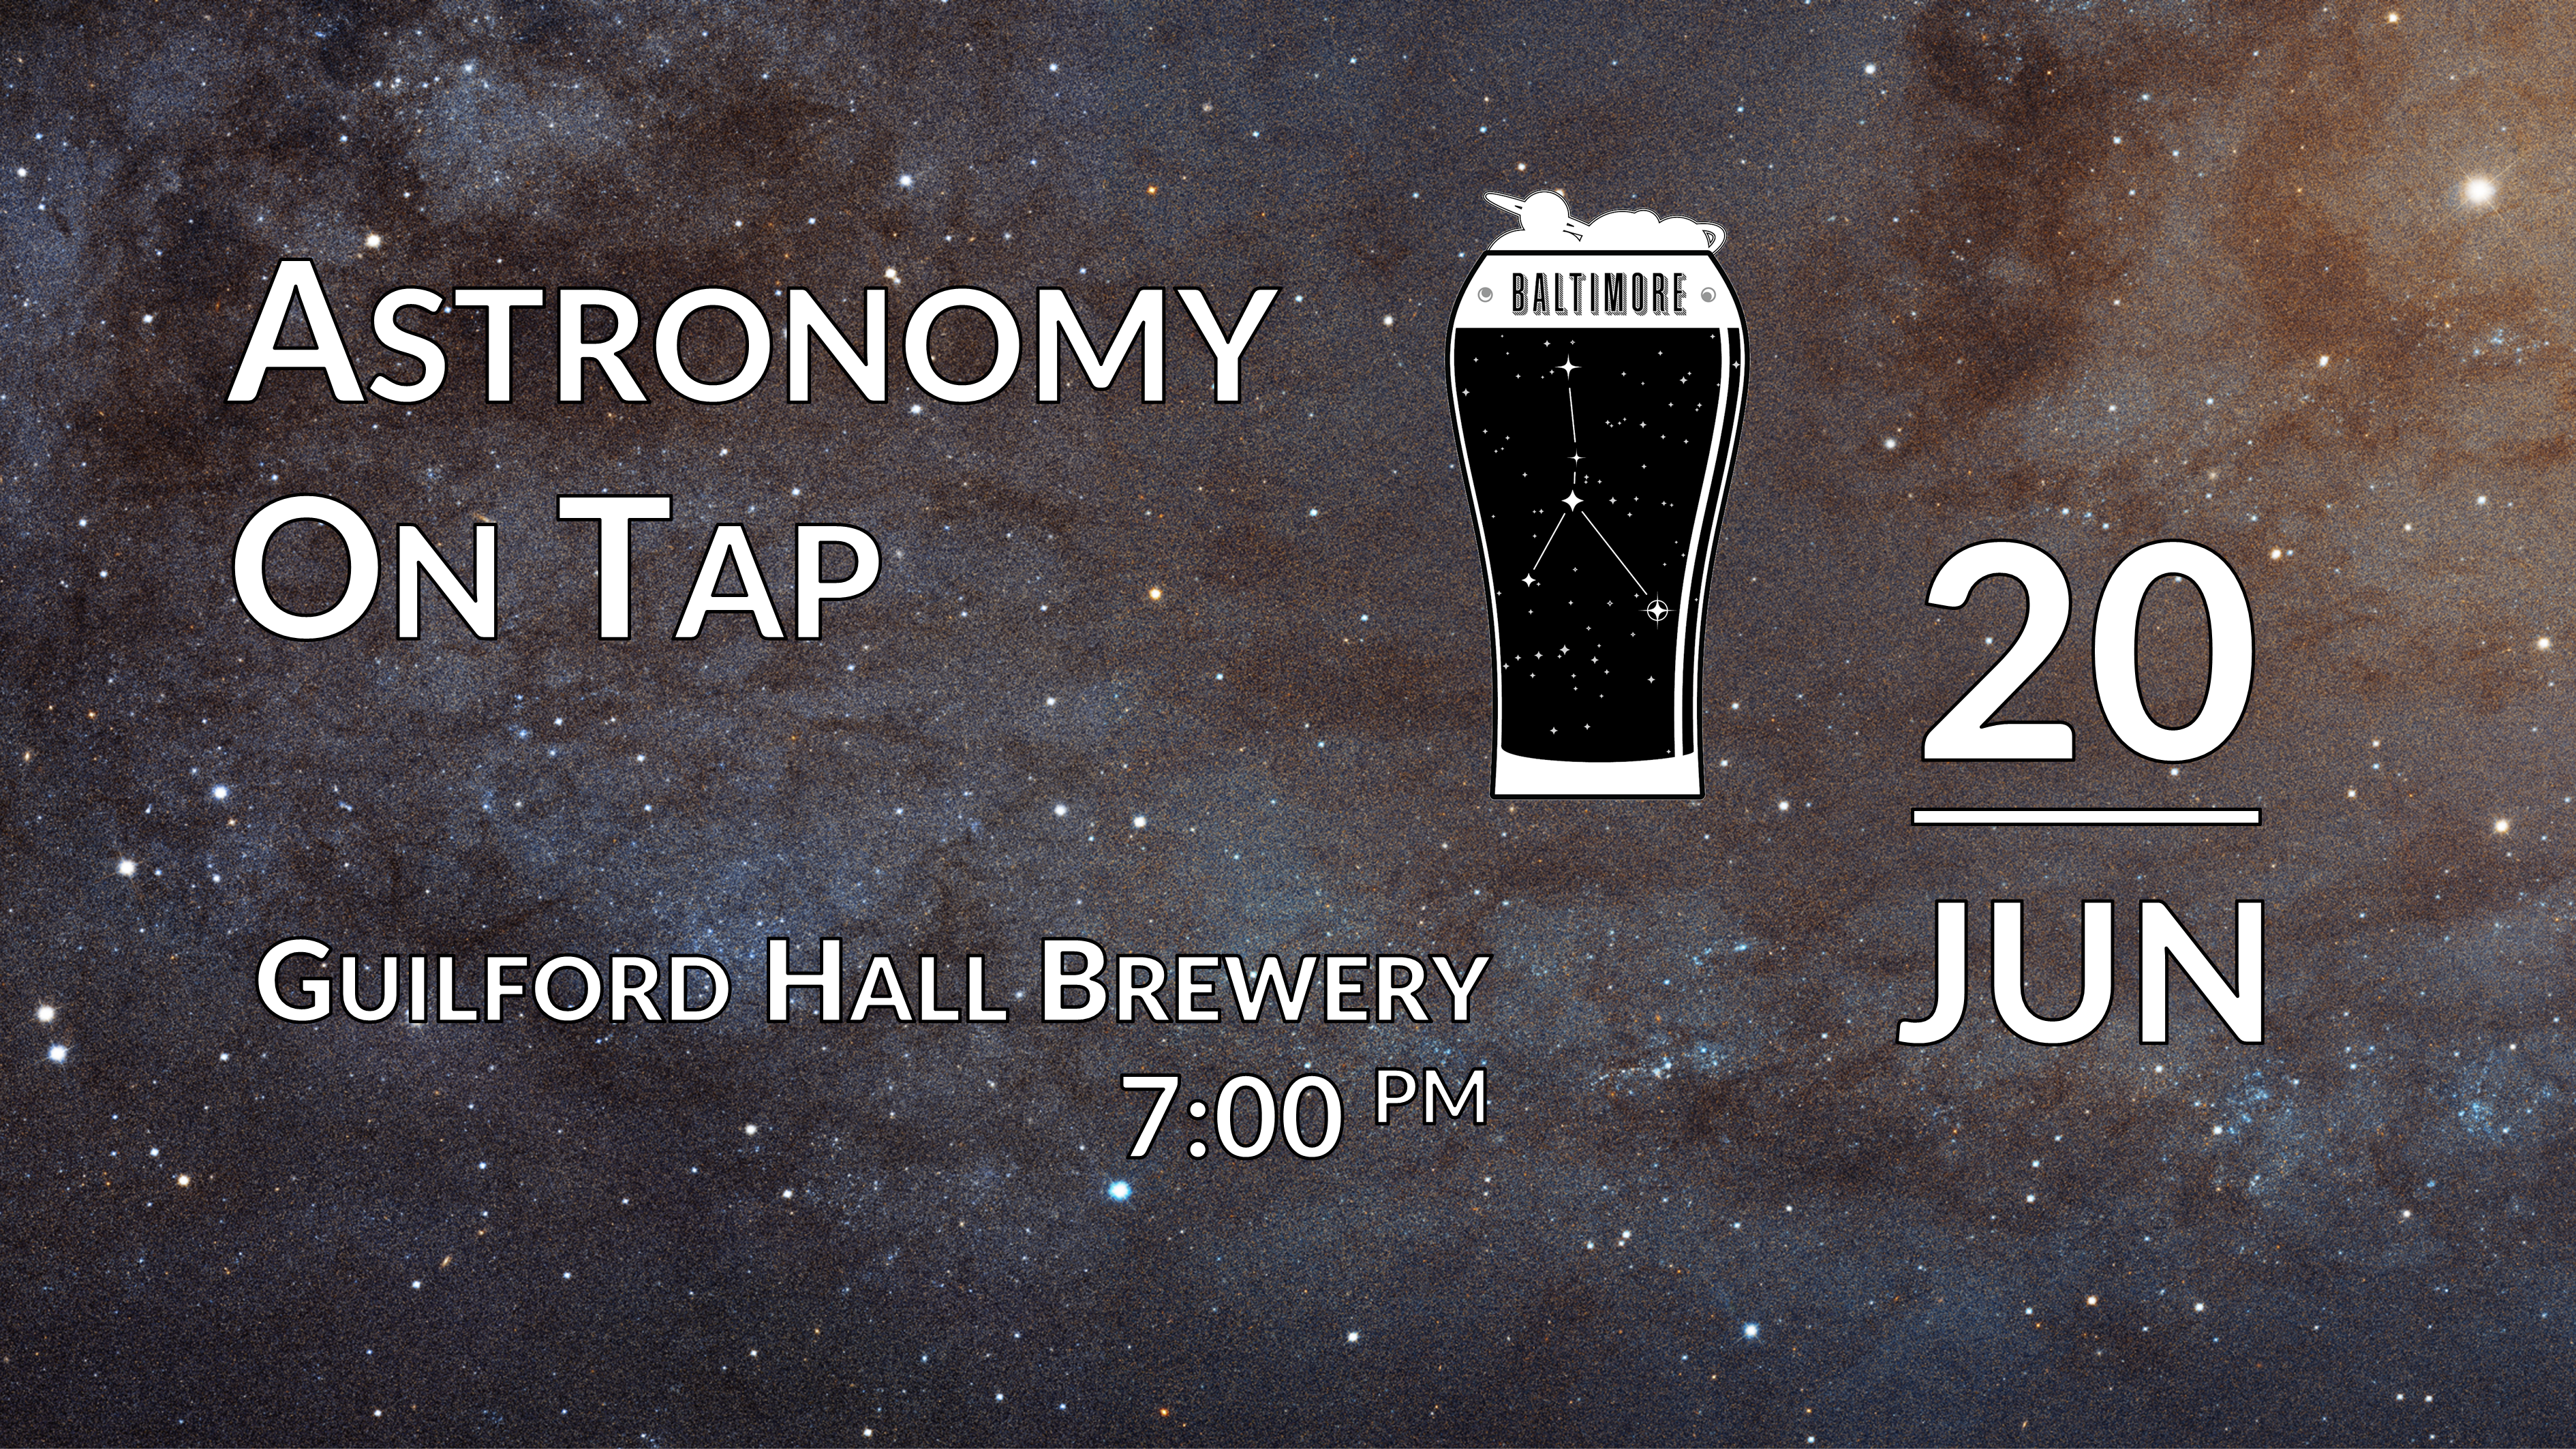 A background of stars in a galaxy with the Astronomy on Tap Baltimore logo in the middle. Words on the left say "Astronomy on Tap, Guilford Hall Brewery 7:00 pm." On the right the data "June 20th" is displayed.